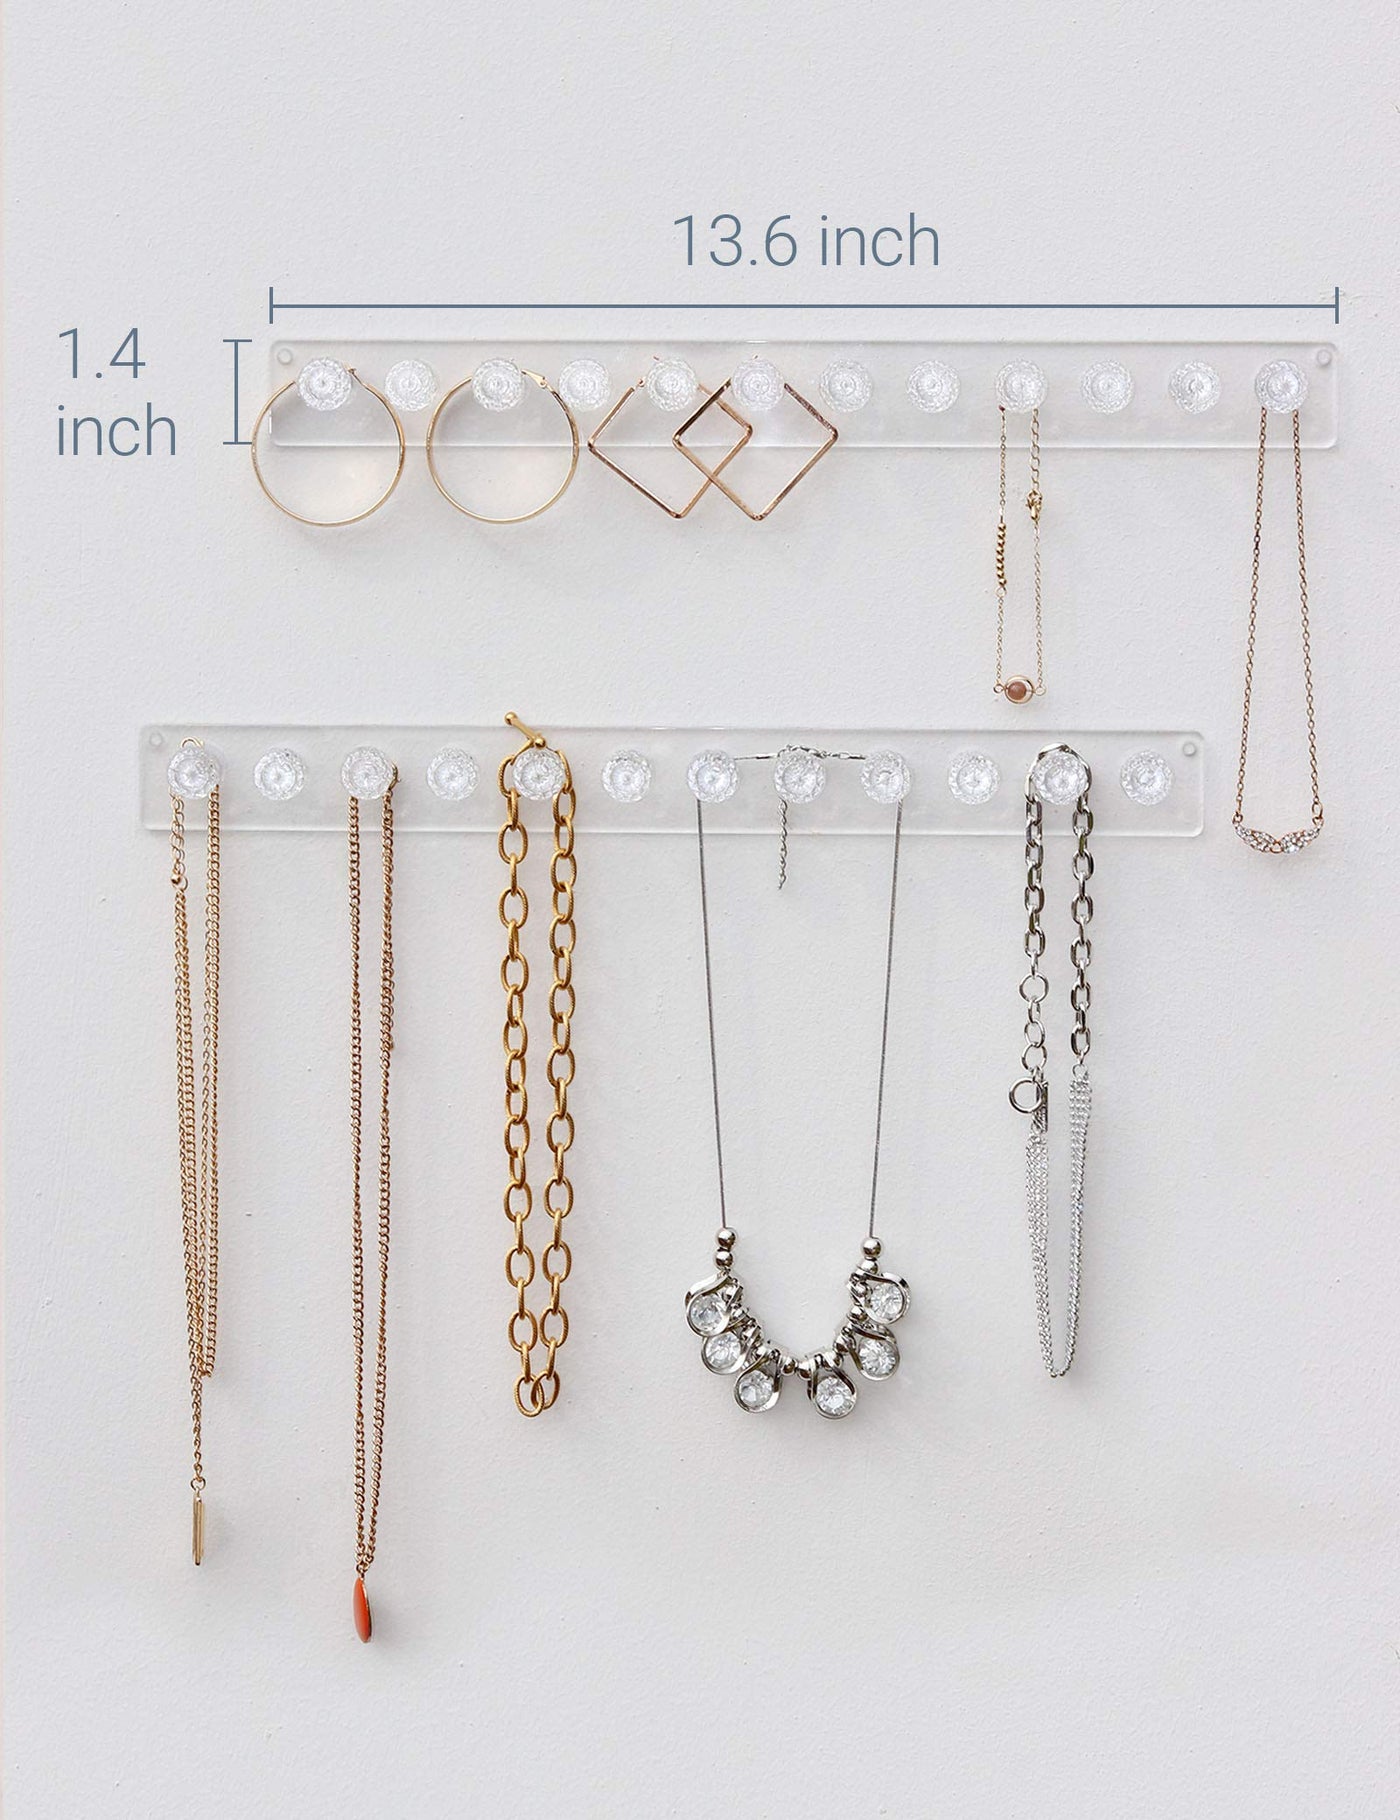 Heesch Necklace Hanger, Acrylic Necklace Organizer Wall Mount Necklace  Holder, Jewelry Hooks for Necklaces, Bracelets, Chains (4-pack Clear) 4